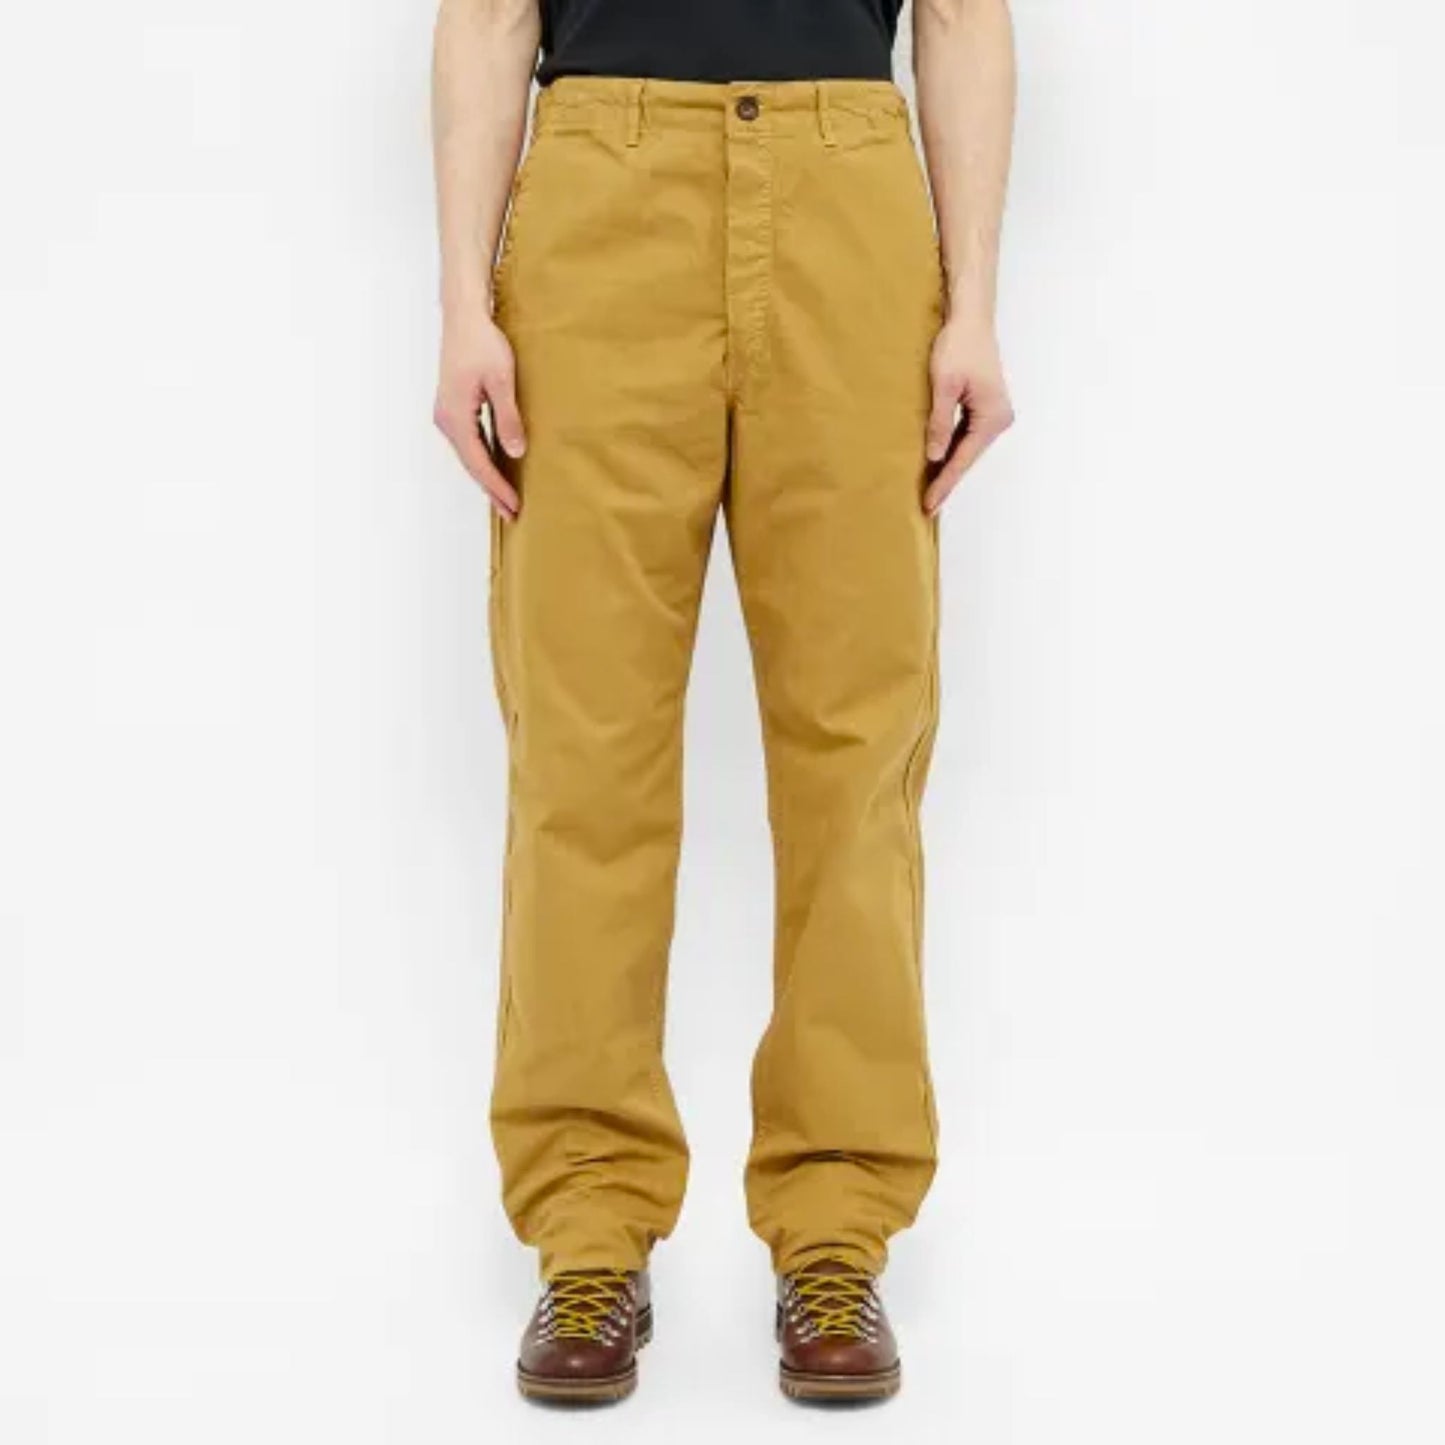 ORSLOW - French Work Pants